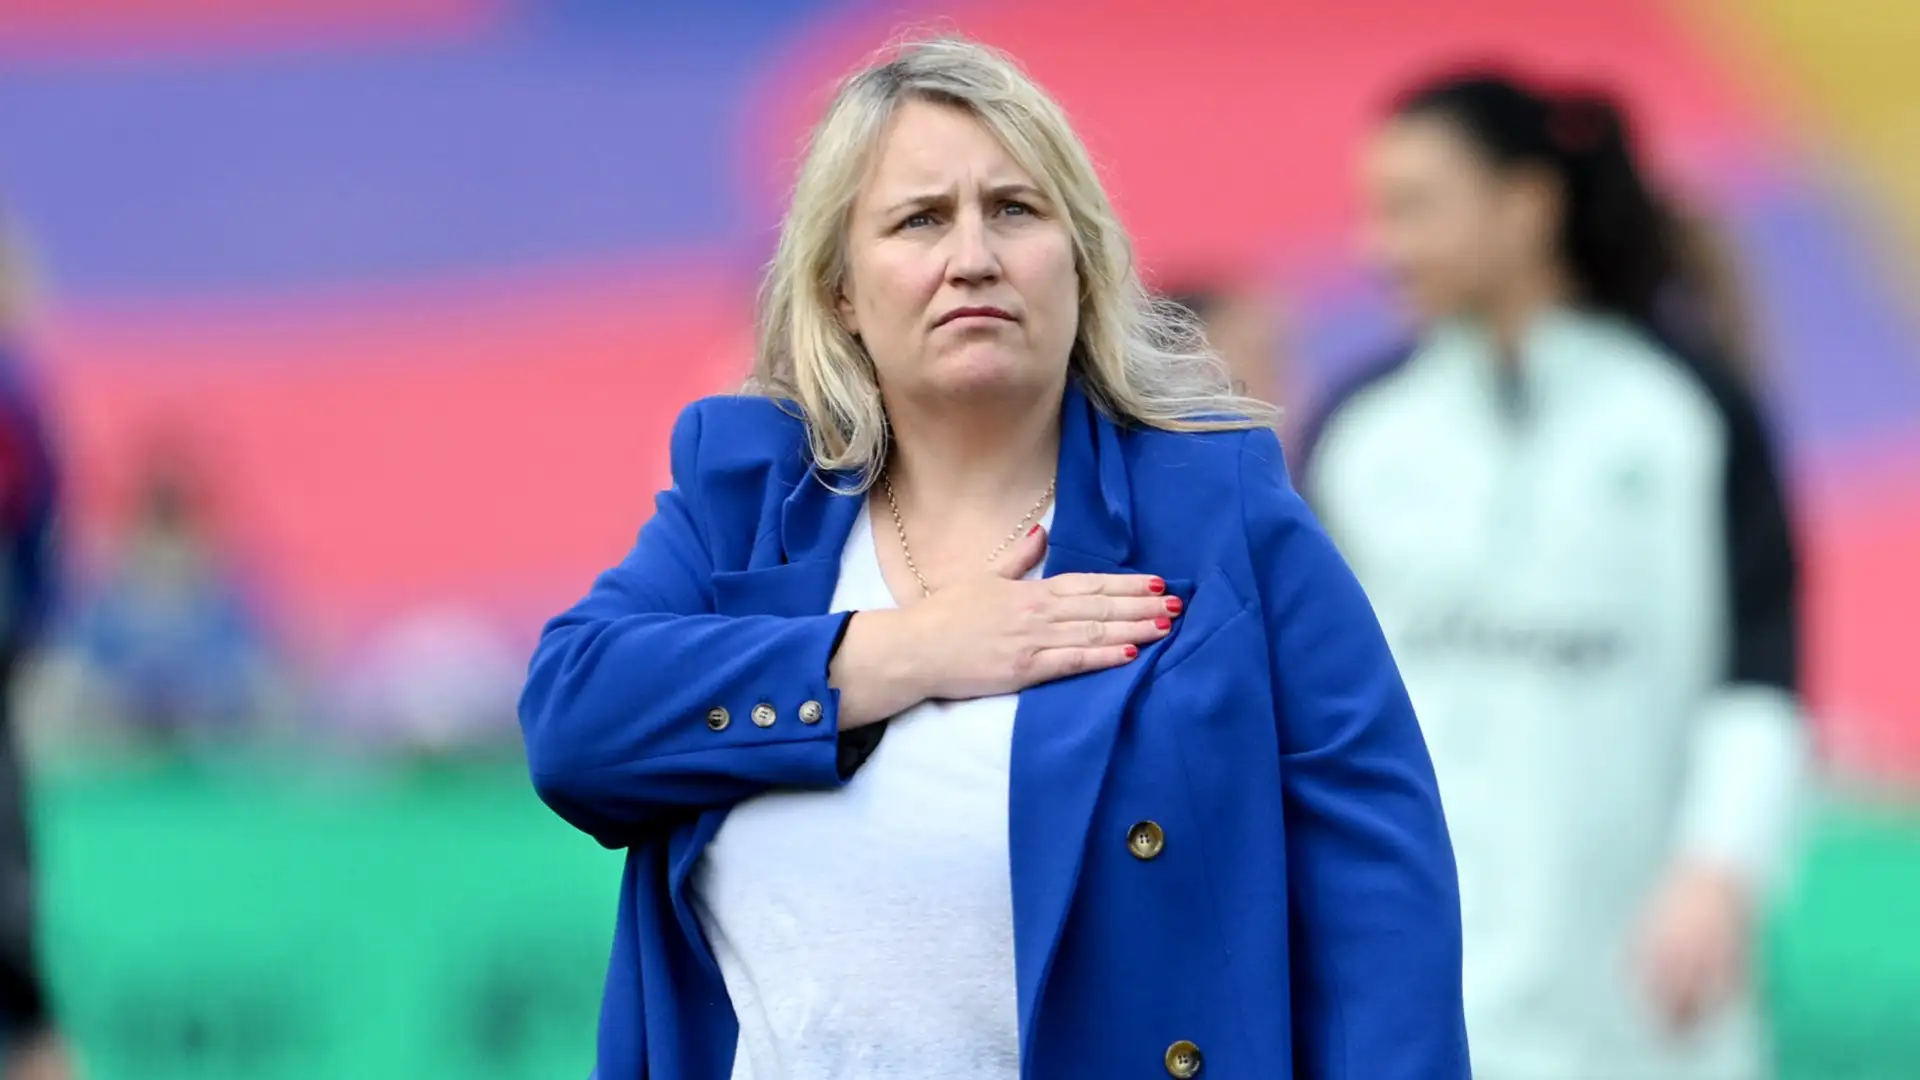 ‘A fitting finale!’ – Emma Hayes geared up for Chelsea’s WSL title decider against Man Utd as legendary manager admits she is ‘knackered’ ahead of move to USWNT